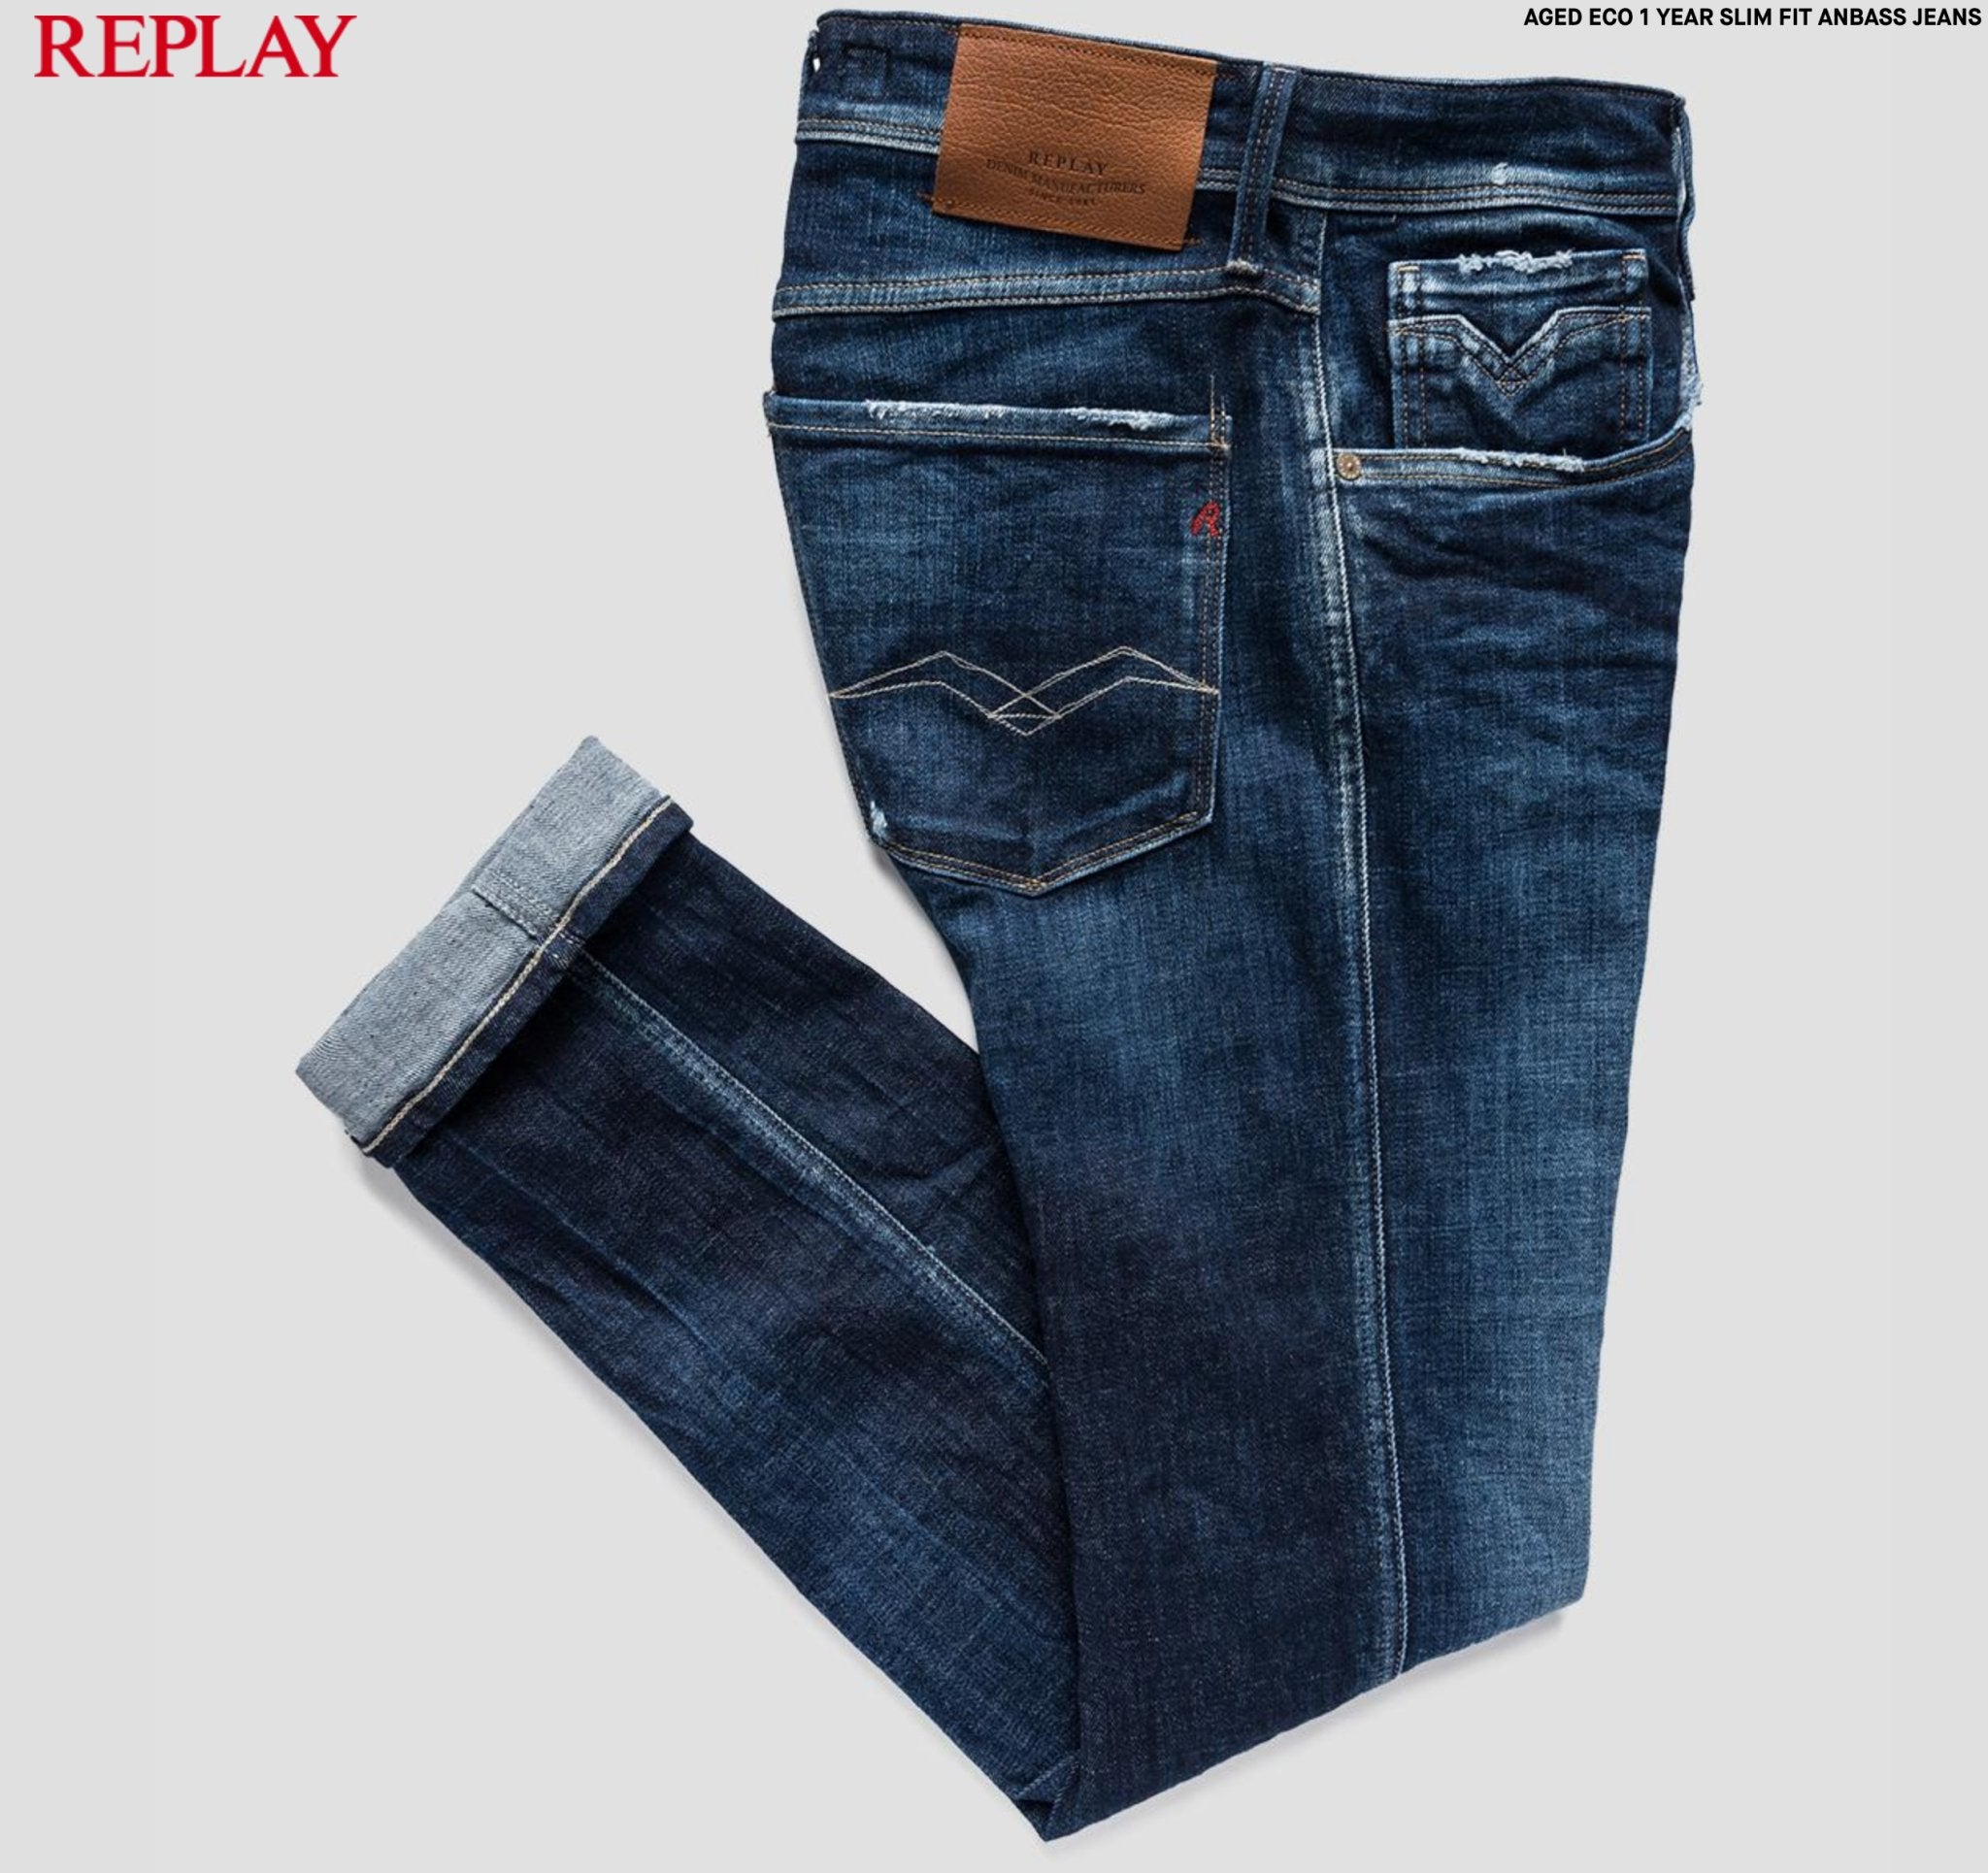 REPLAY SHIFT MOTORCYCLE JEANS BLACK